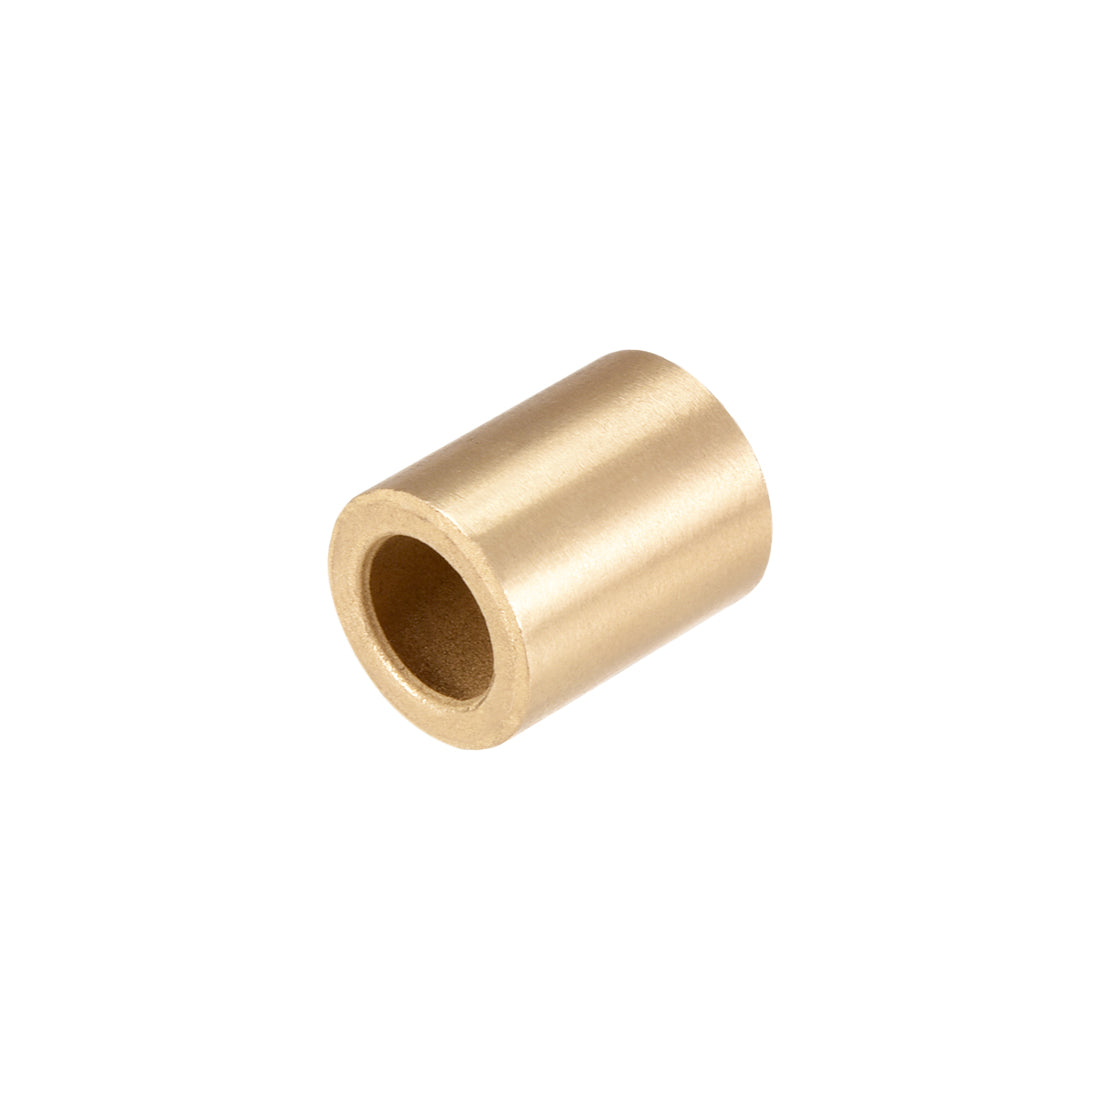 uxcell Uxcell Bearing Sleeve Self-Lubricating Sintered Bronze Bushing